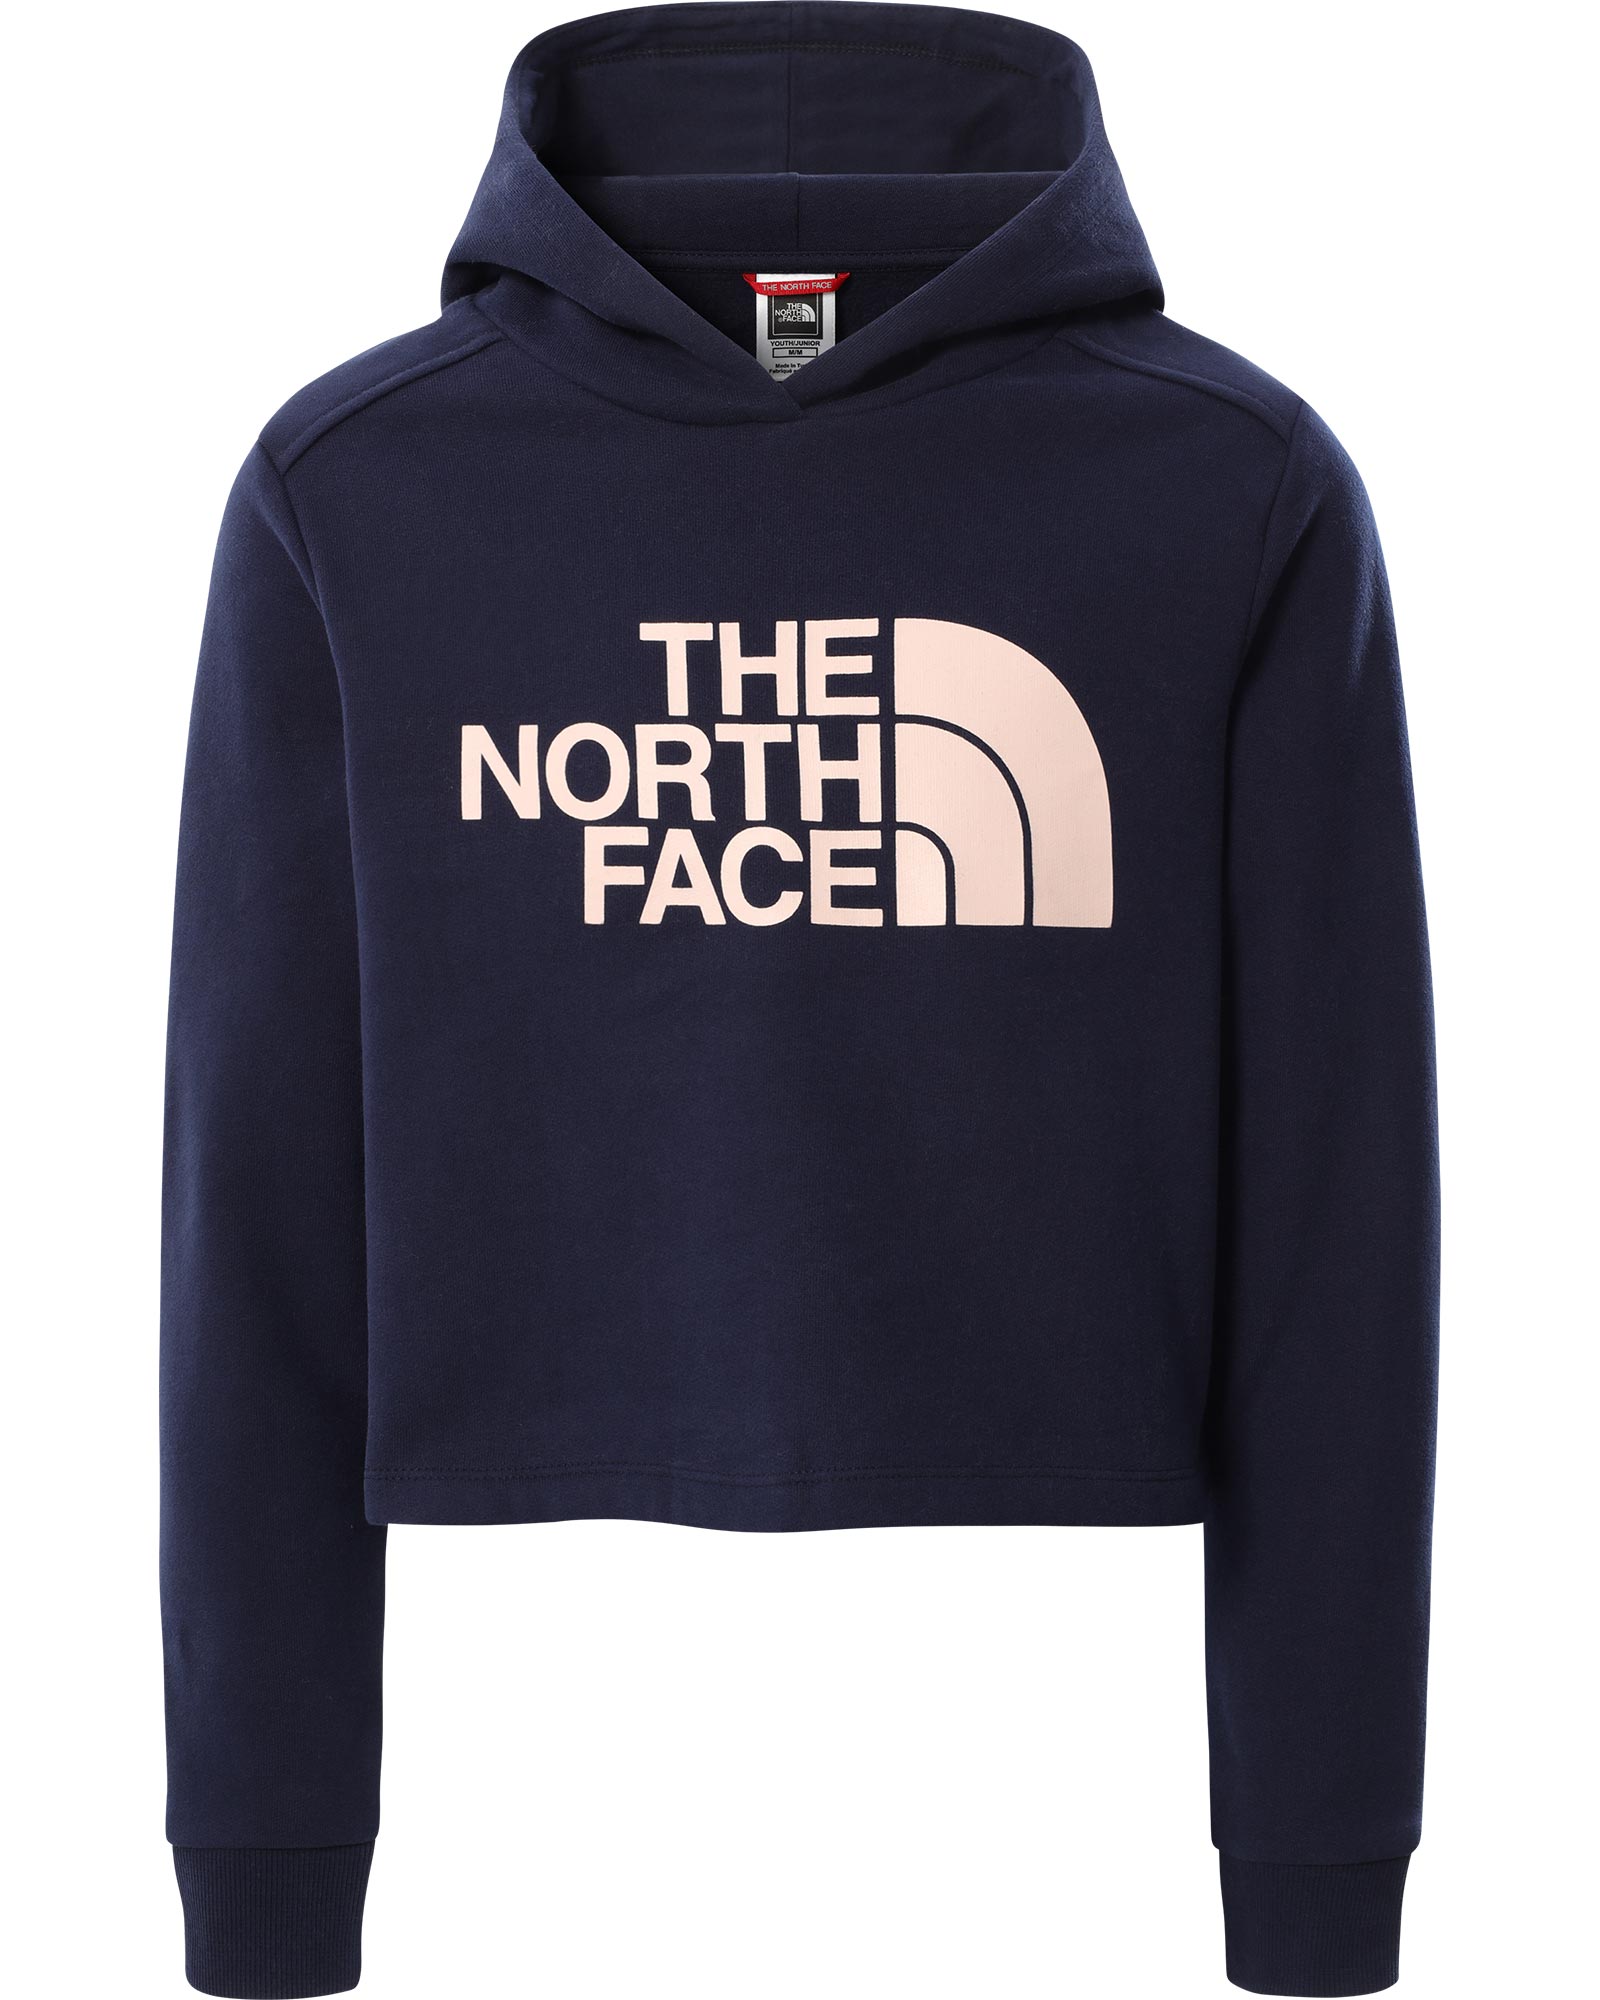 The North Face Drew Peak Cropped P/o Girls Hoodie Xl